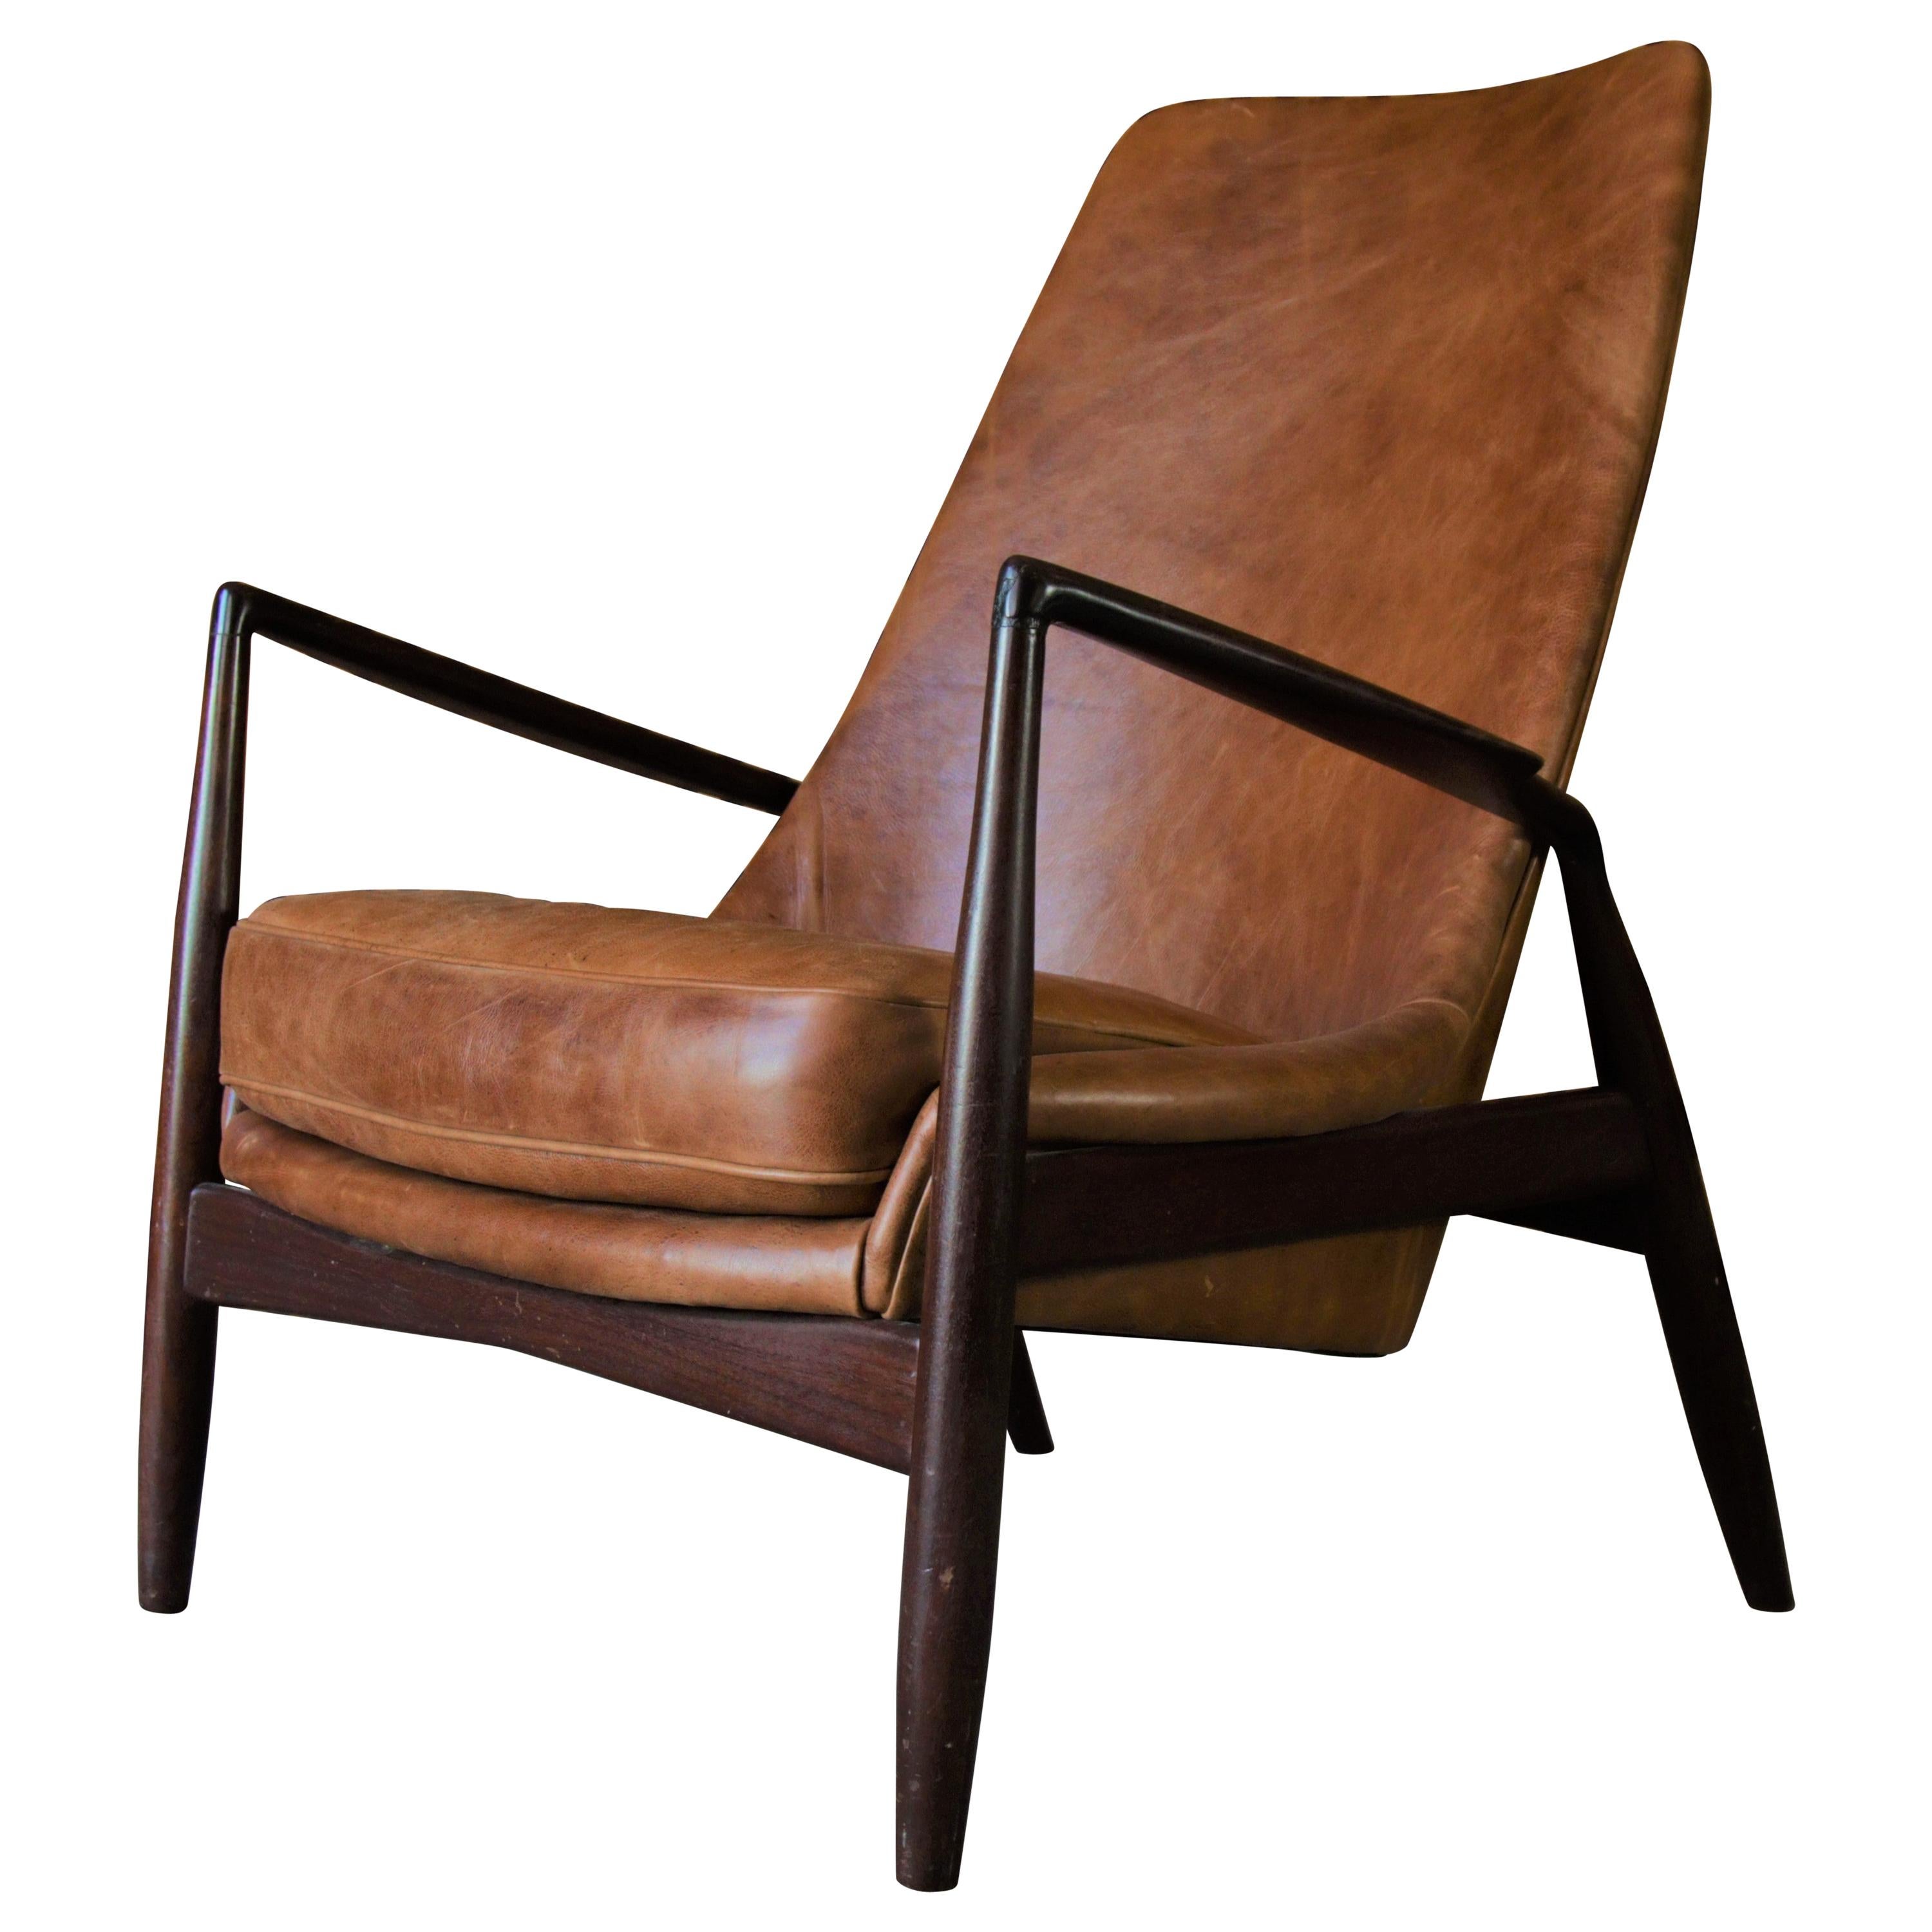 1950s Ib Kofod-Larsen Seal Chair in Afromosia Teak and Cognac Leather